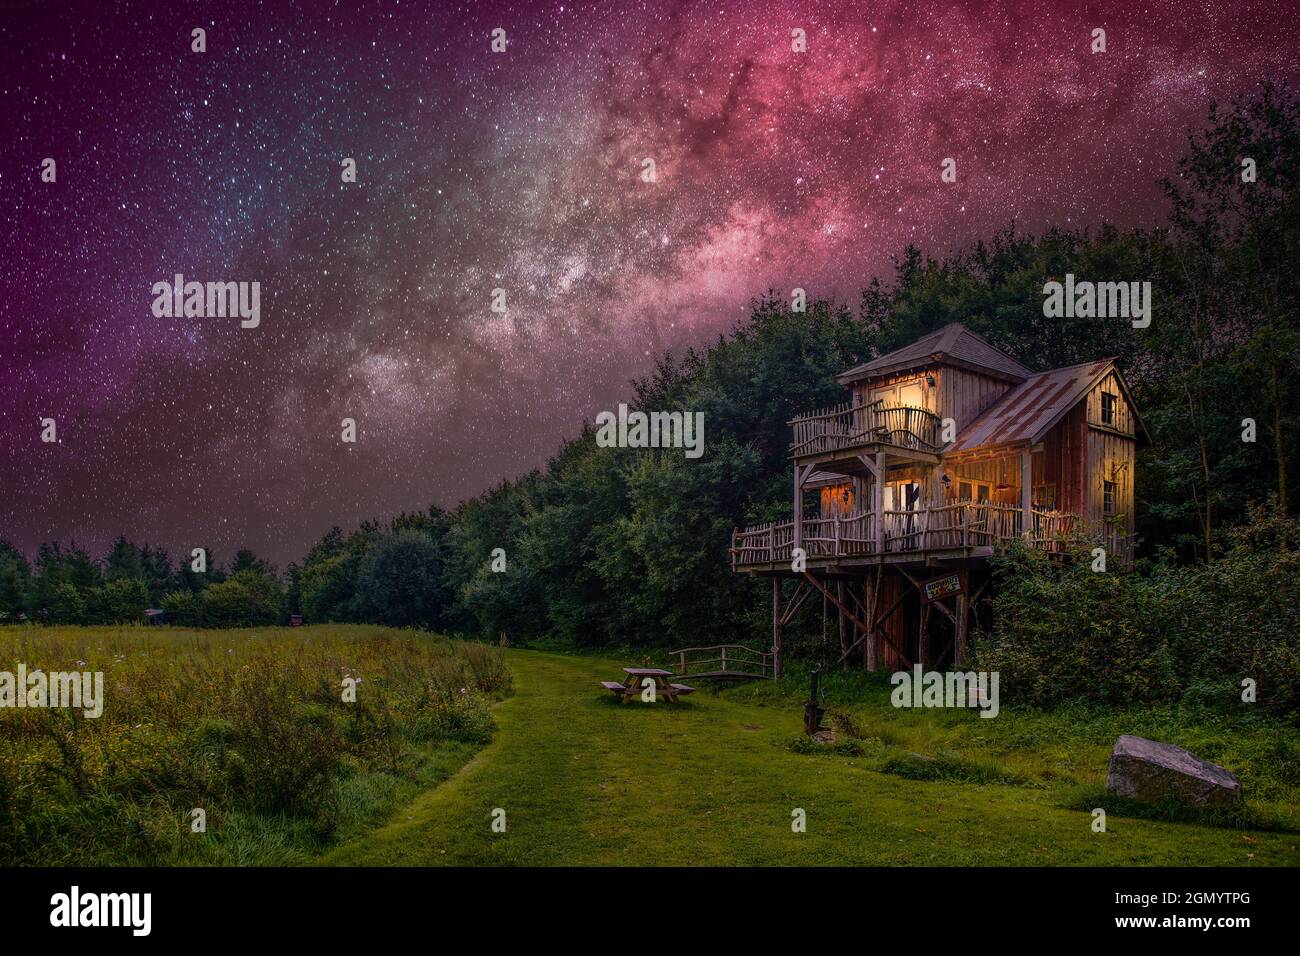 Night scene of a tree house on a forest edge and path along flower meadow with warm yellow lamplight shining through the windows Stock Photo